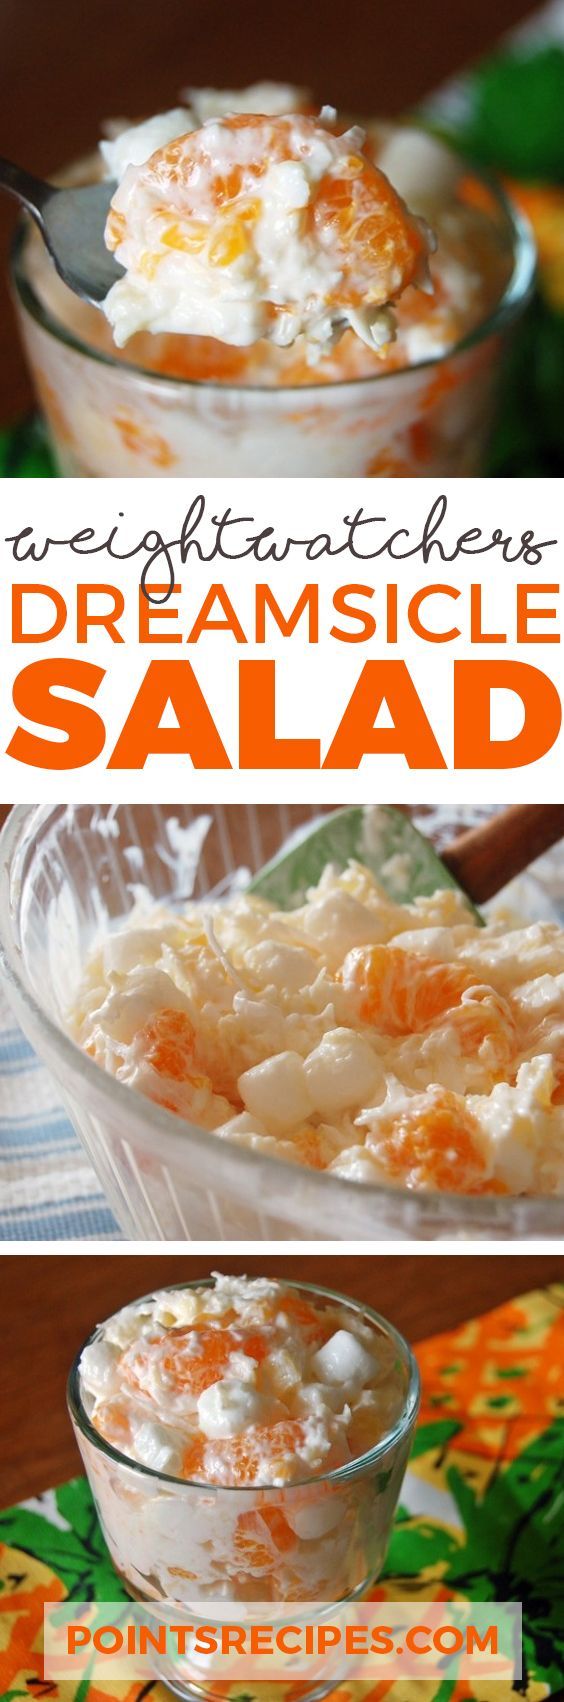 Dreamsicle Salad (Weight Watchers Smarpoints)